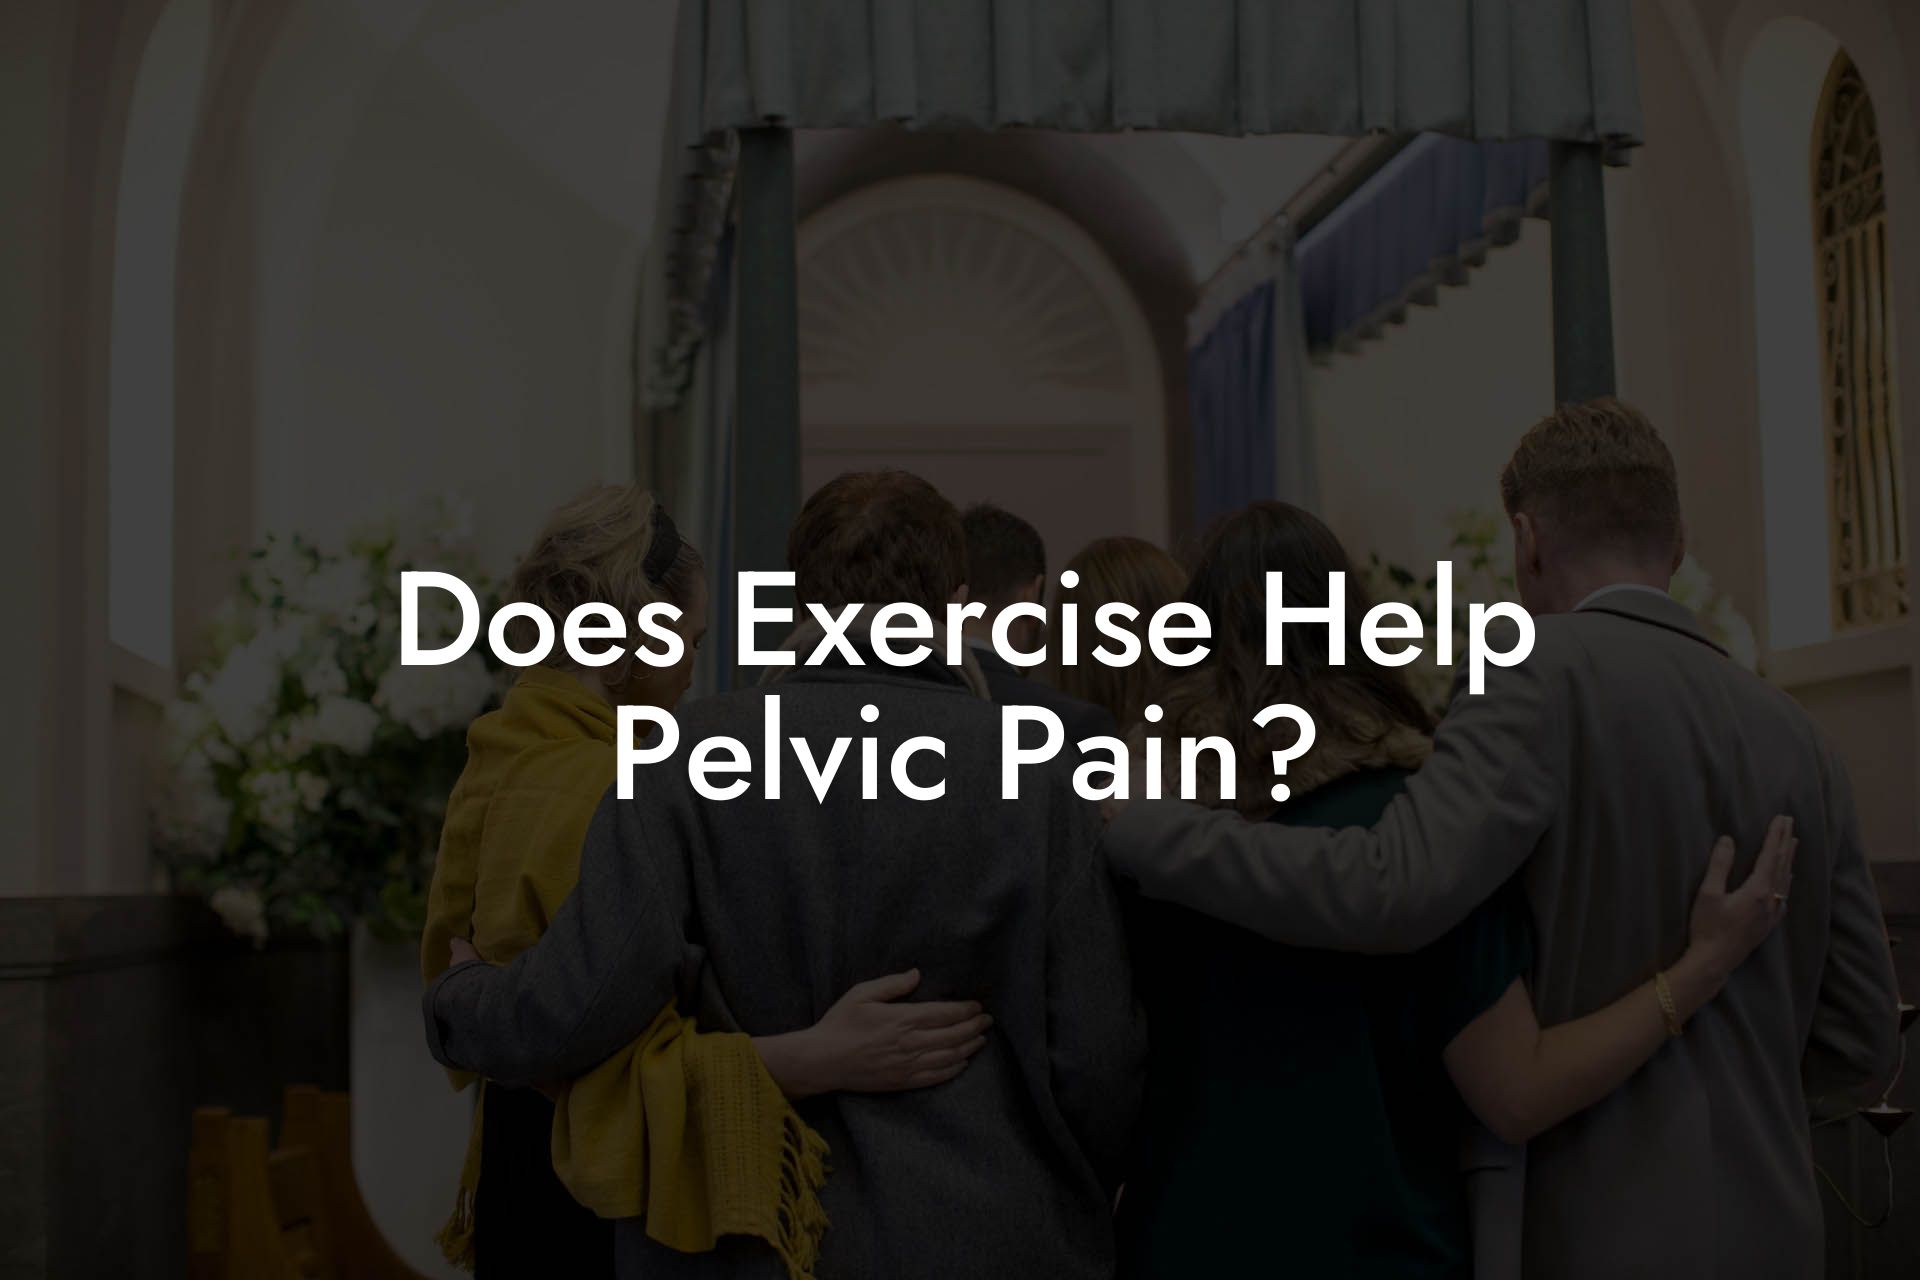 Does Exercise Help Pelvic Pain?